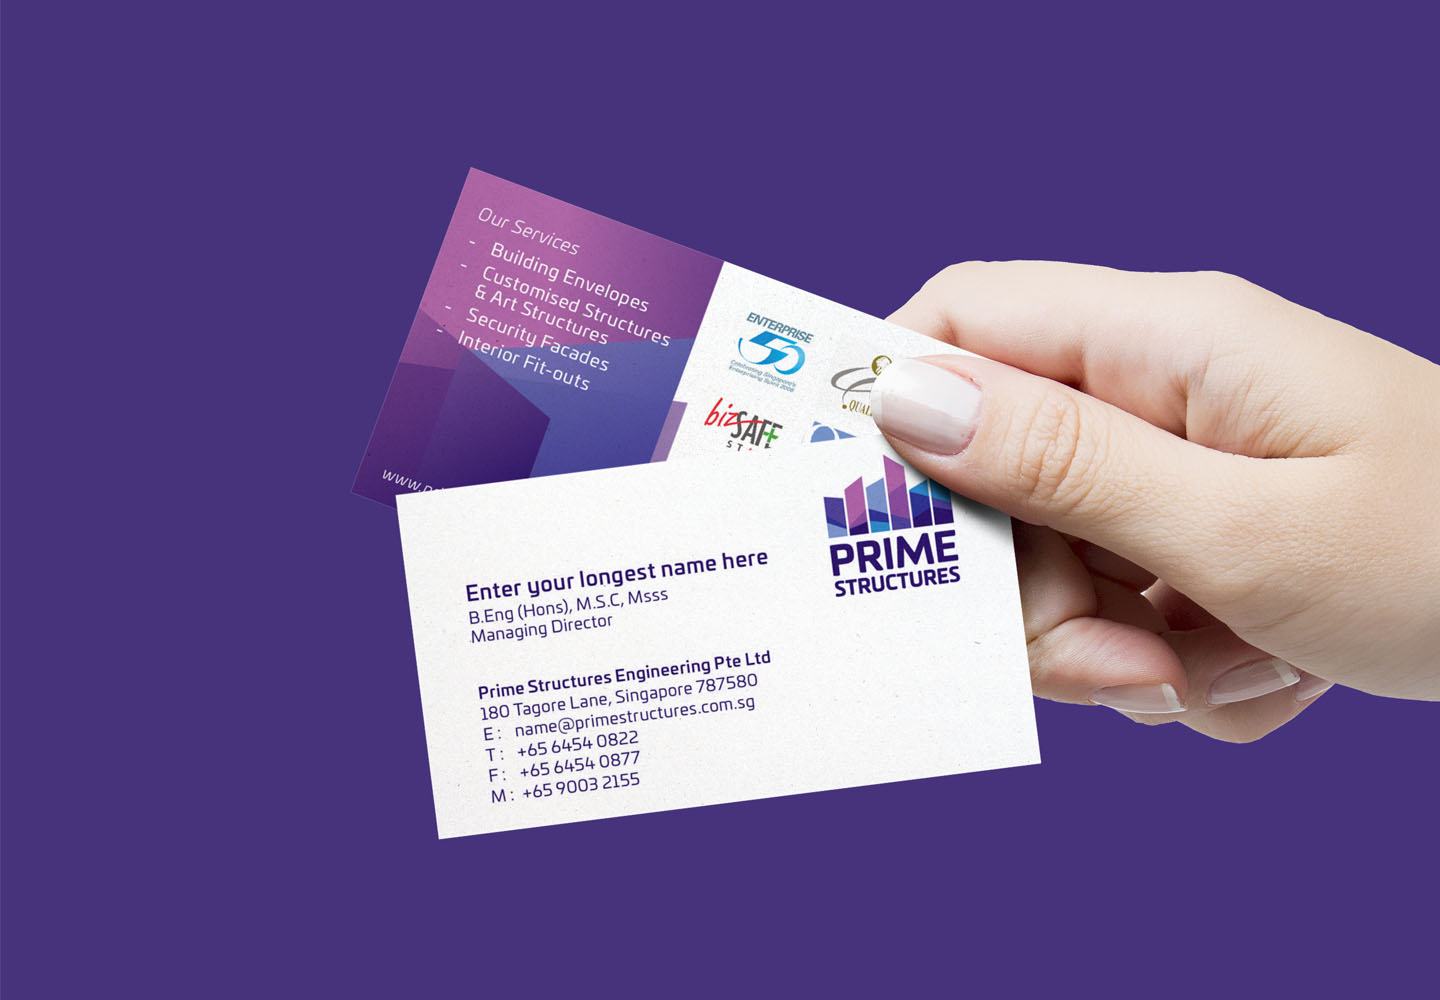 Brand Consultancy in Construction Industry. Business Card Design for Prime Structures